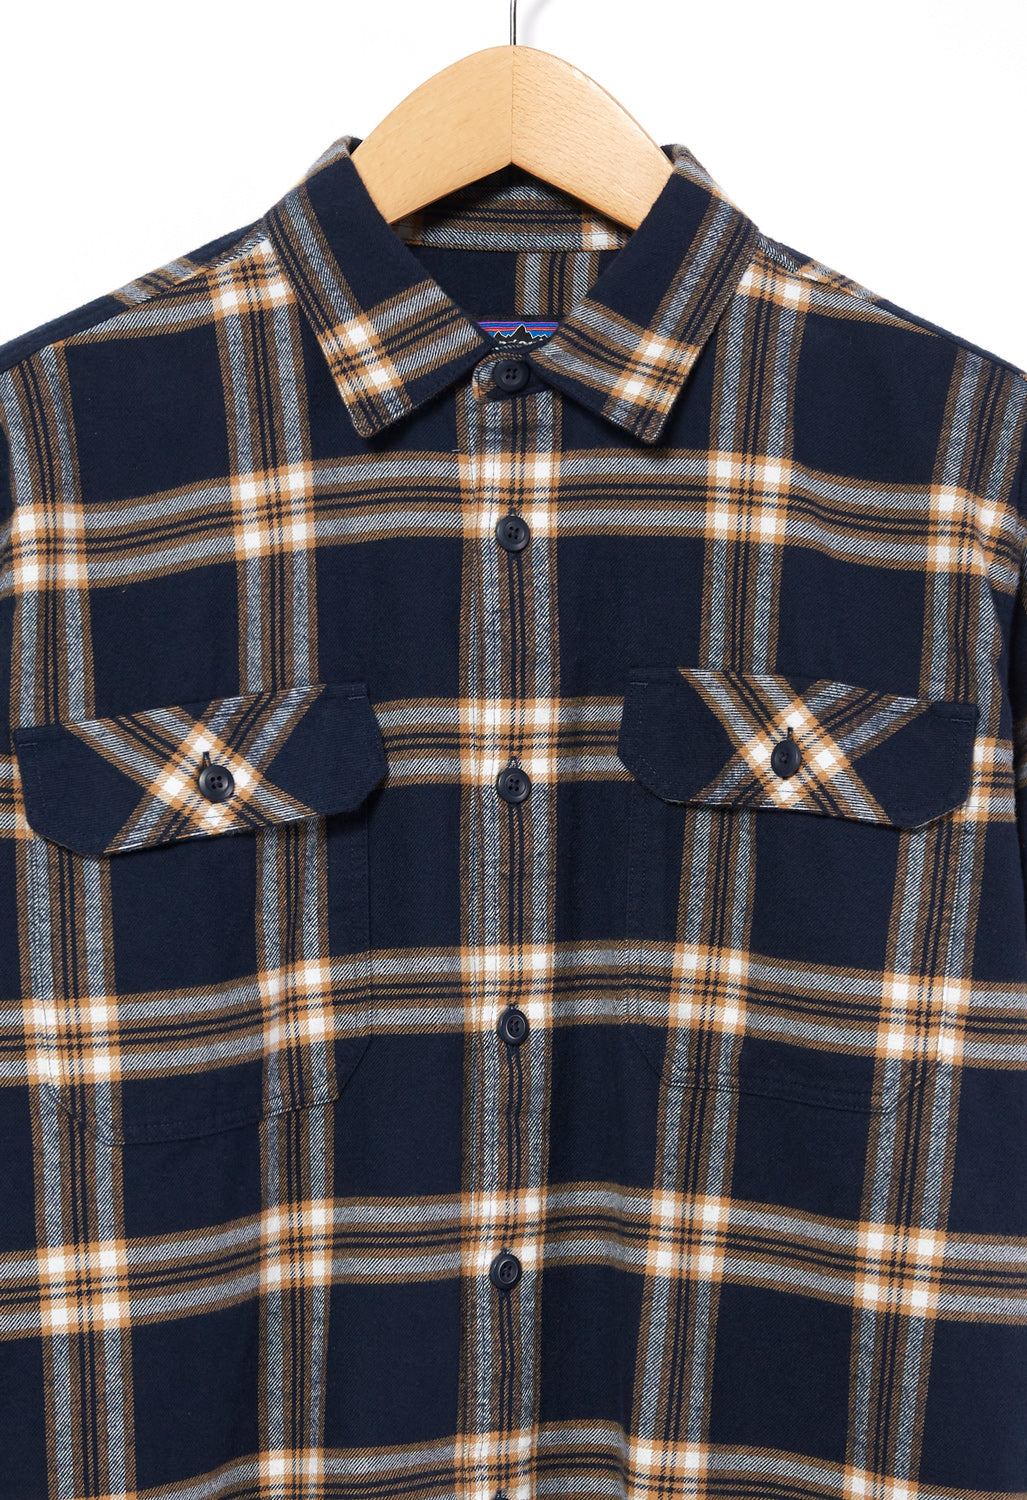 Patagonia Men's Organic Long Sleeve Flannel Shirt - New Navy/North Line